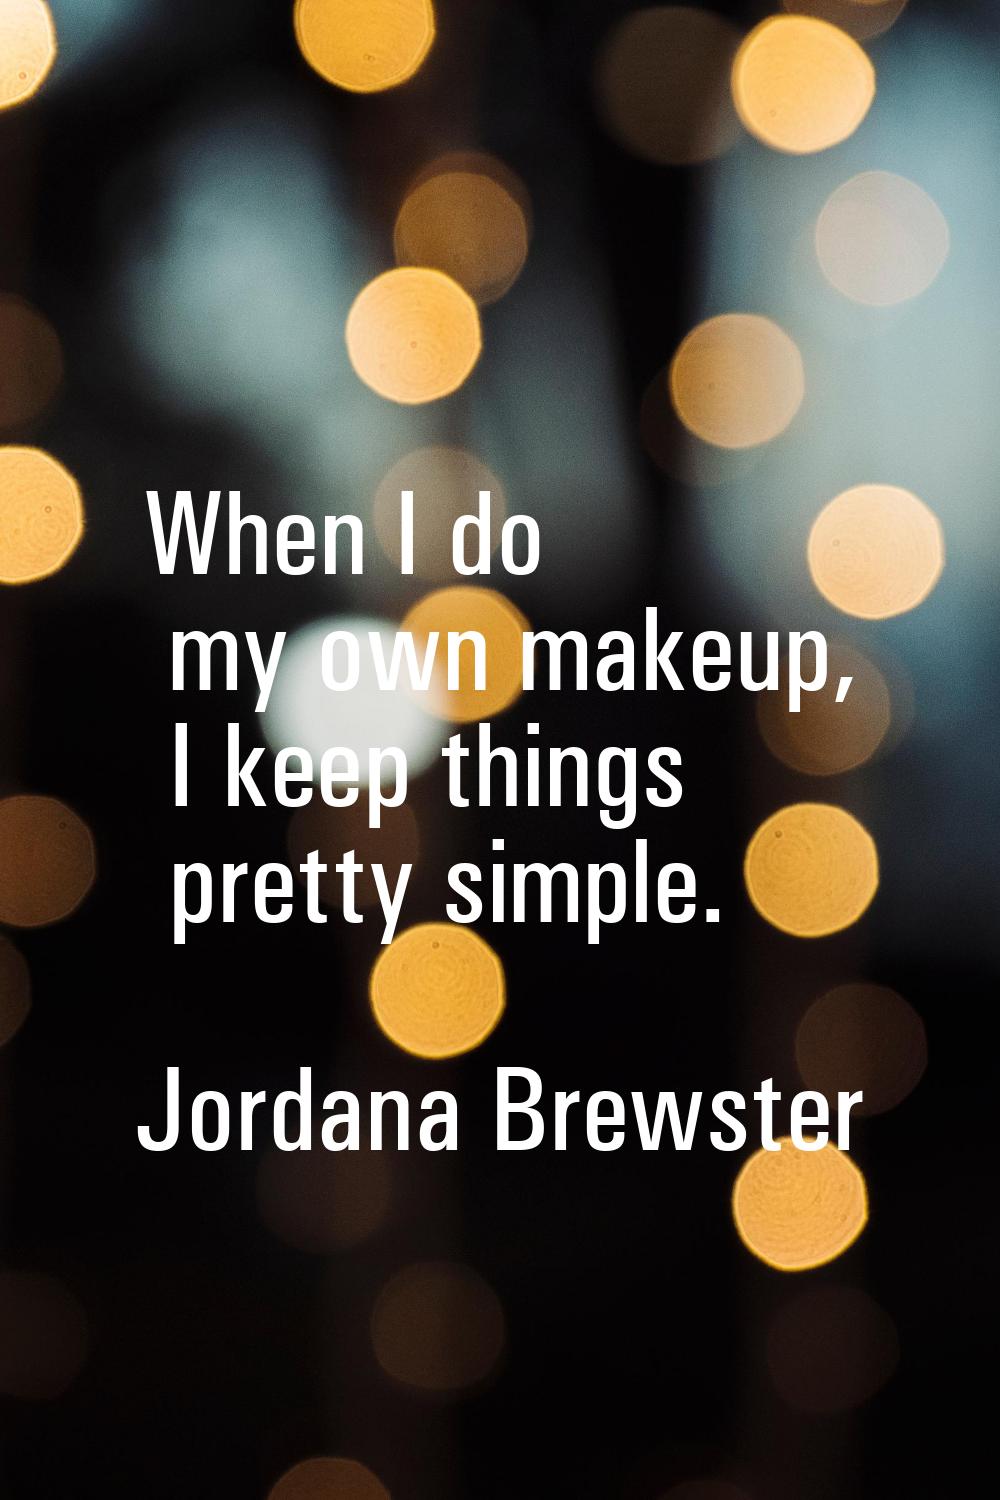 When I do my own makeup, I keep things pretty simple.